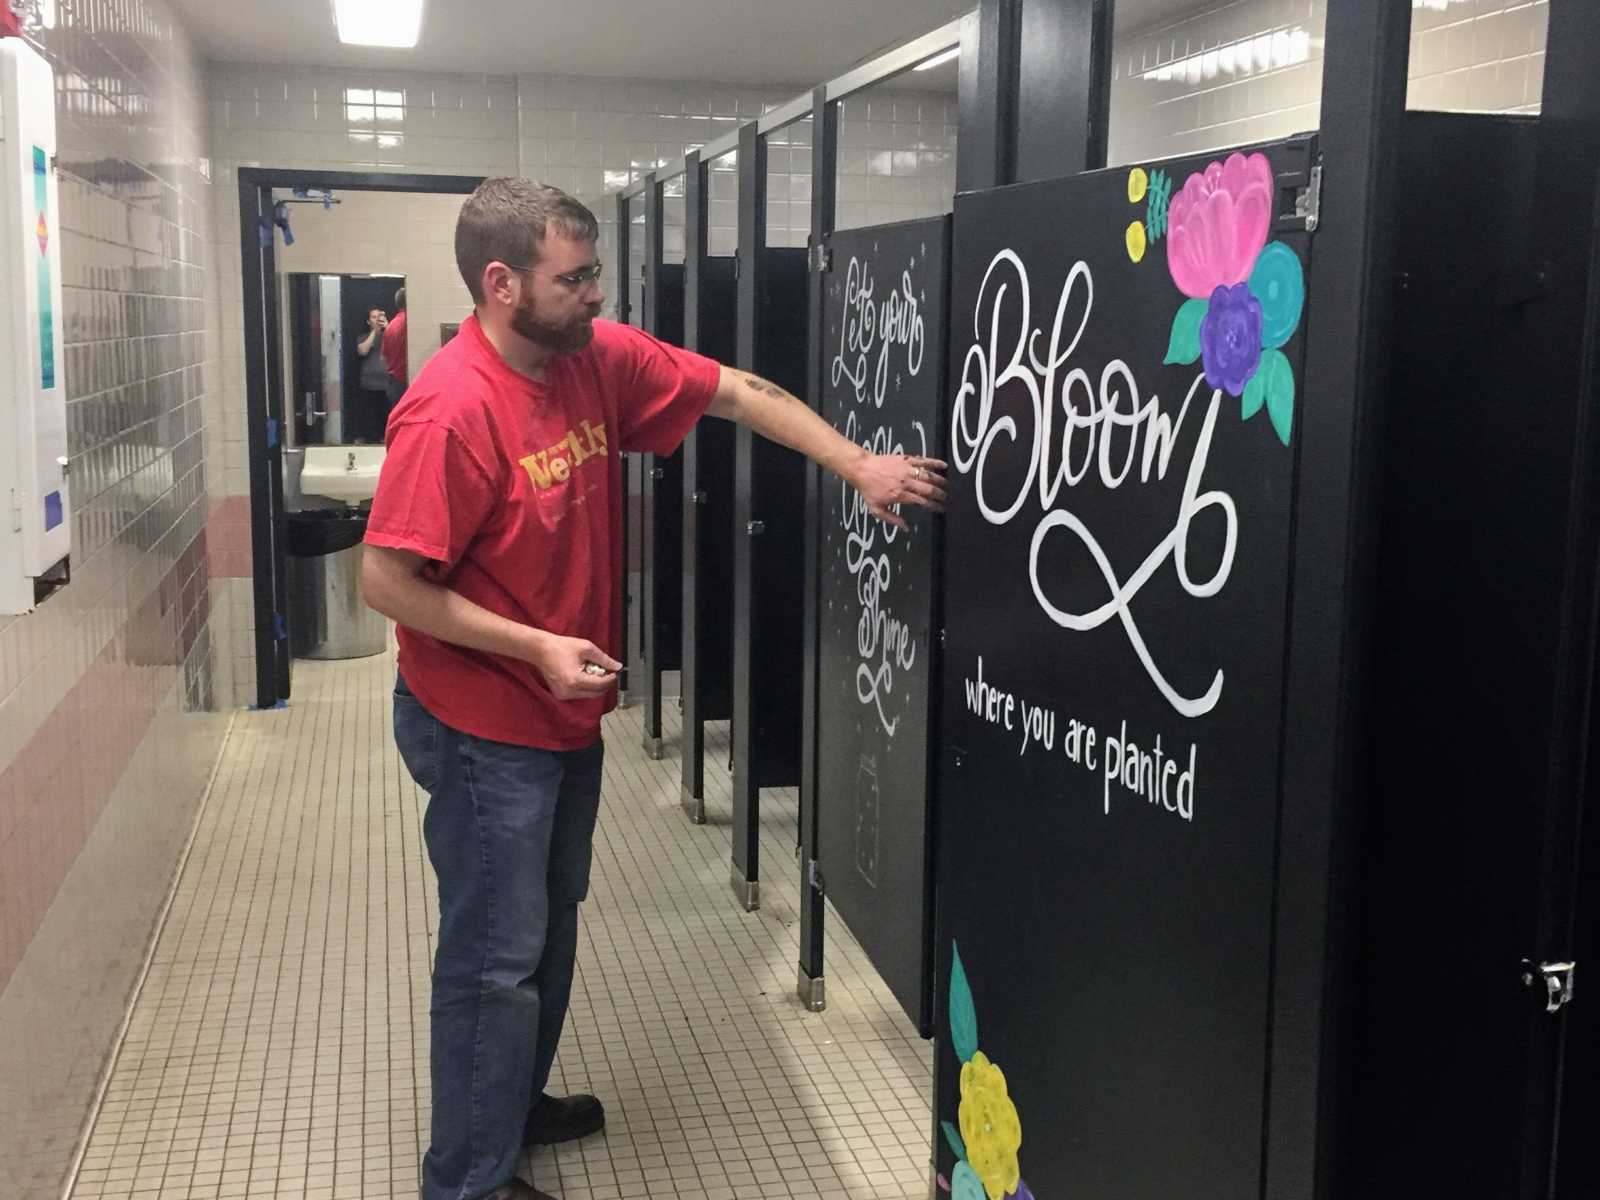 man standing in public restroom holding stall door containing inspirational message saying, "bloom where you are planted"